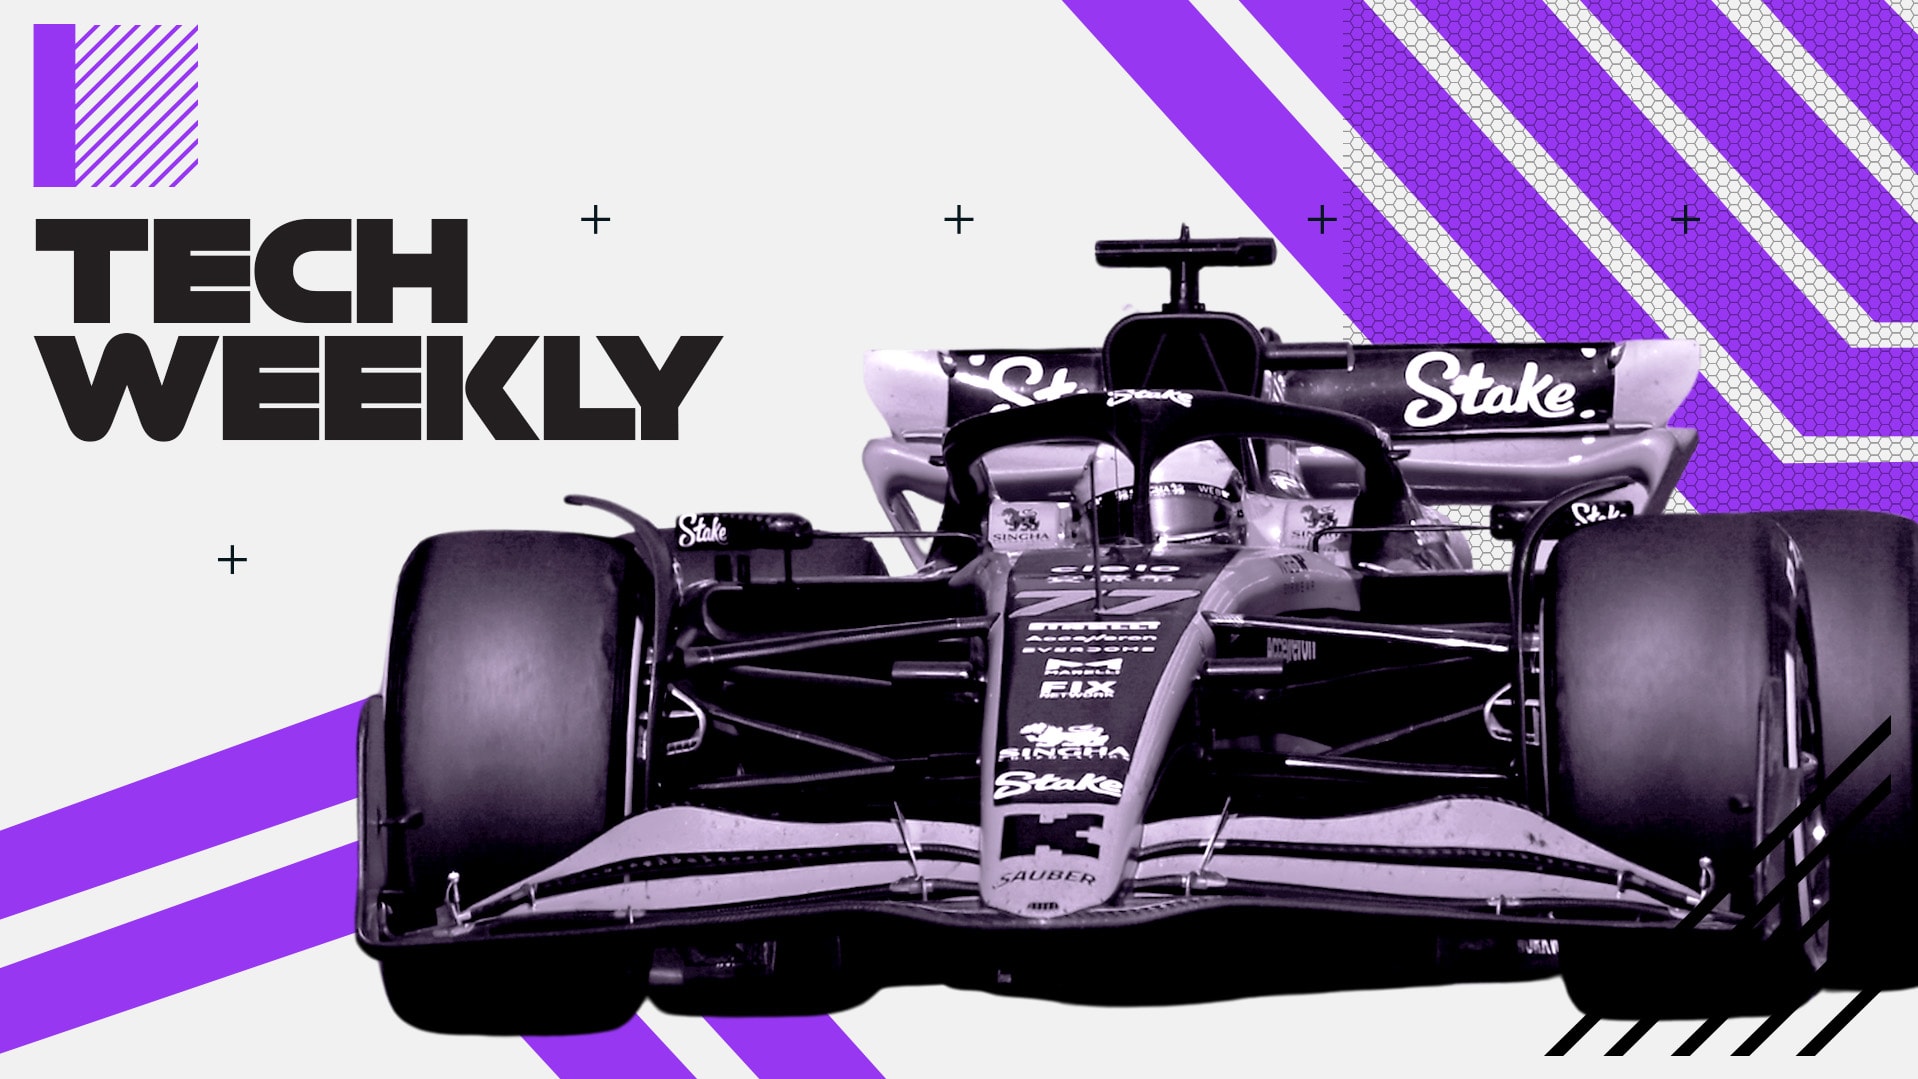 TECH WEEKLY: Why Kick Sauber’s upgrades could show their full potential in Canada